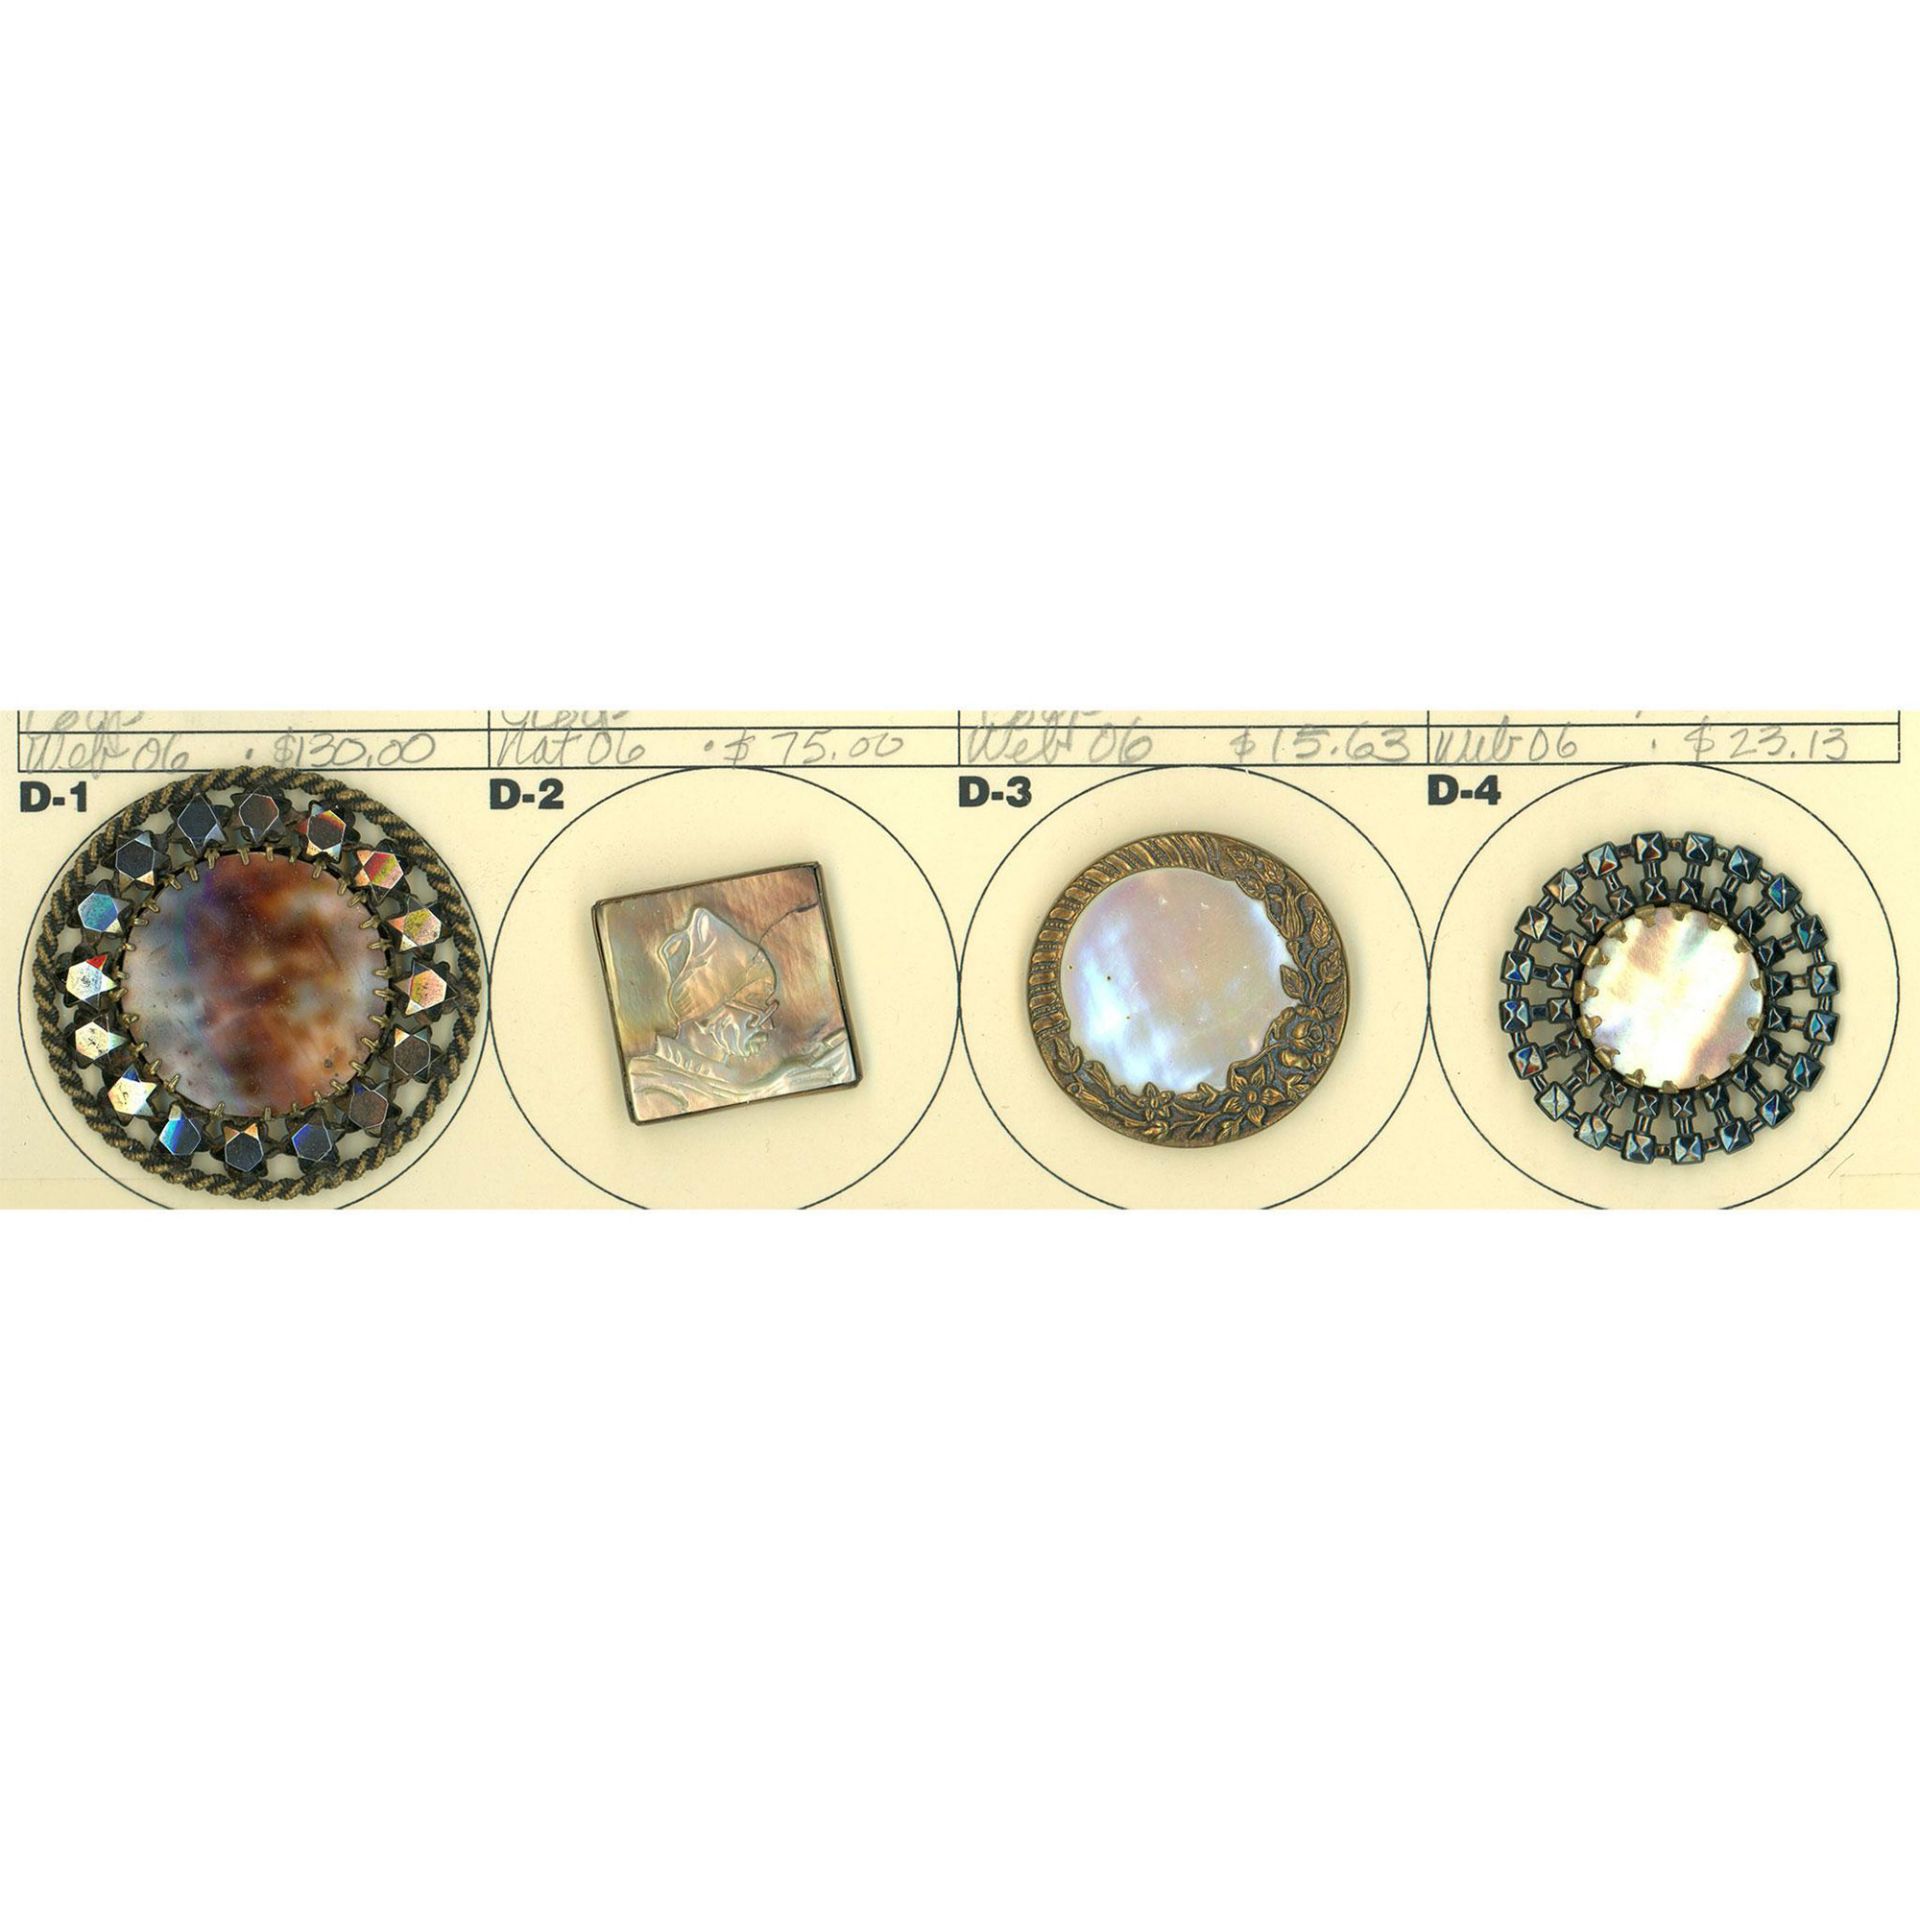 A small card of assorted division one shell buttons